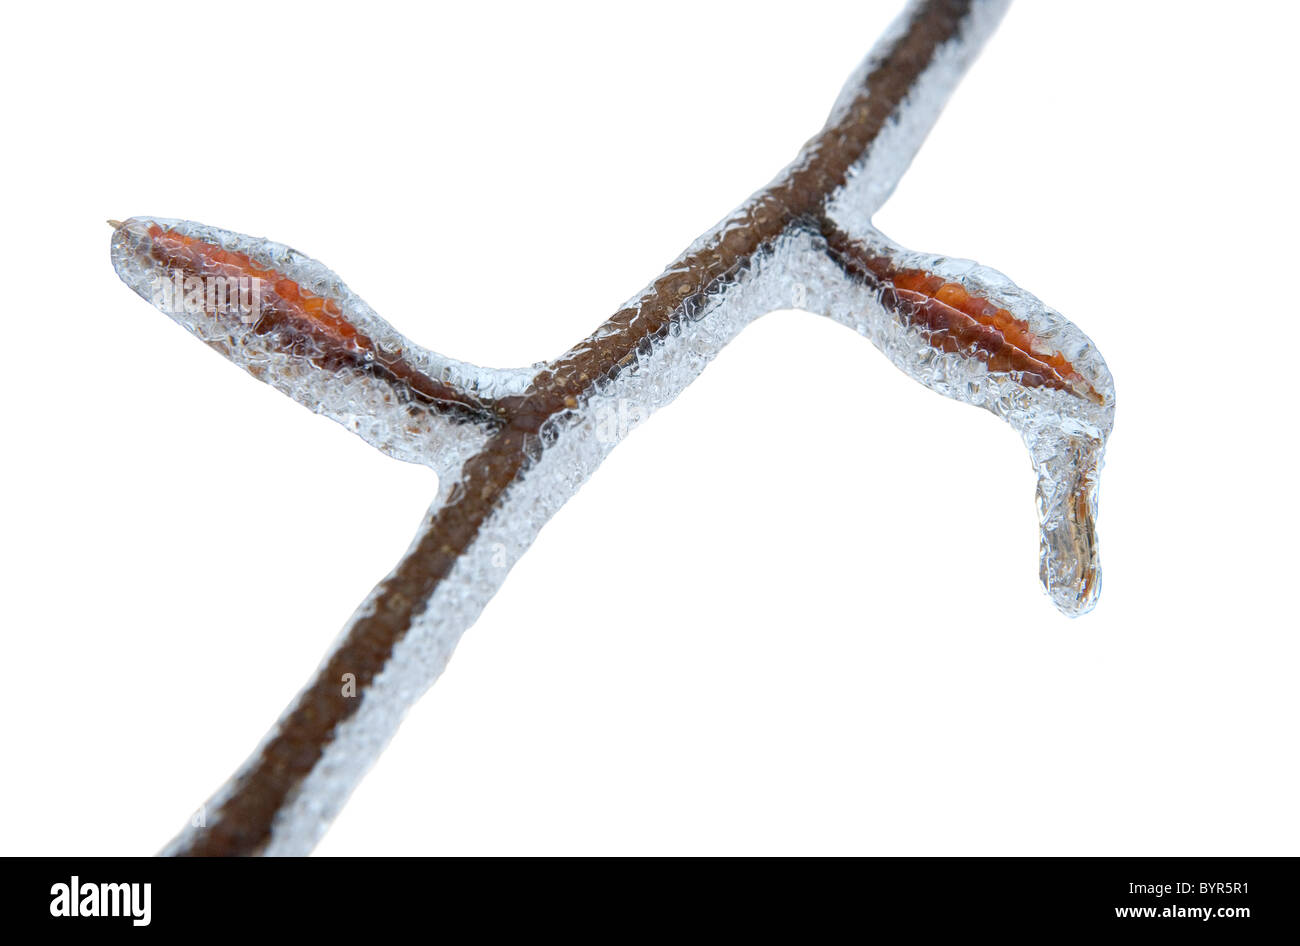 A beech tree twig and leaf buds covered in ice after an ice storm in winter Stock Photo